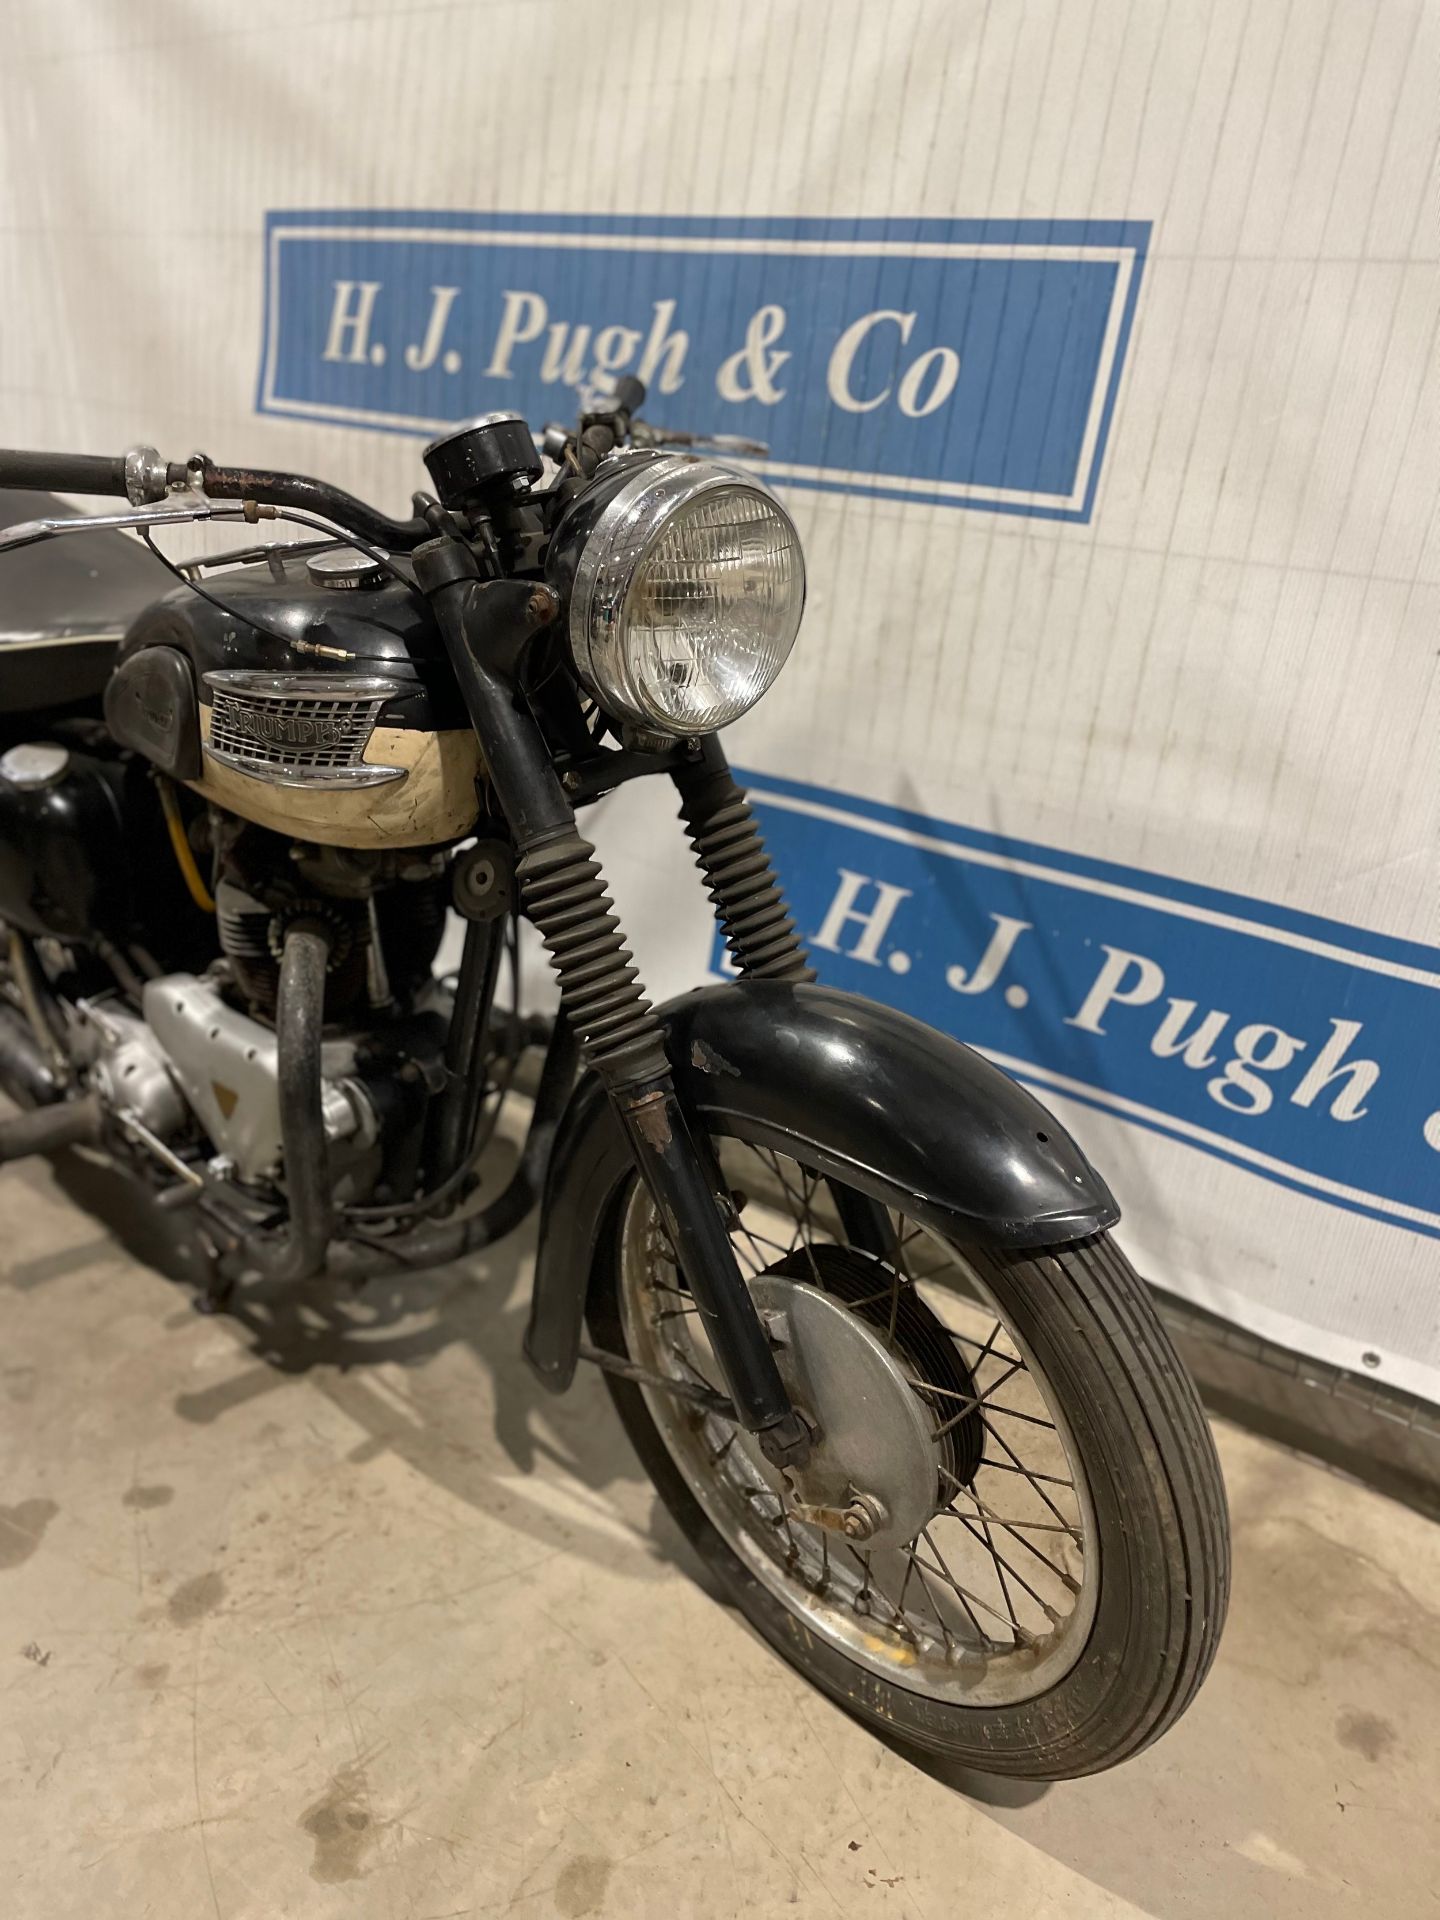 Triumph T110 motorcycle. 1958. 650cc. Easy to ride. C/w some history. Reg 354 XVT. V5 - Image 2 of 14